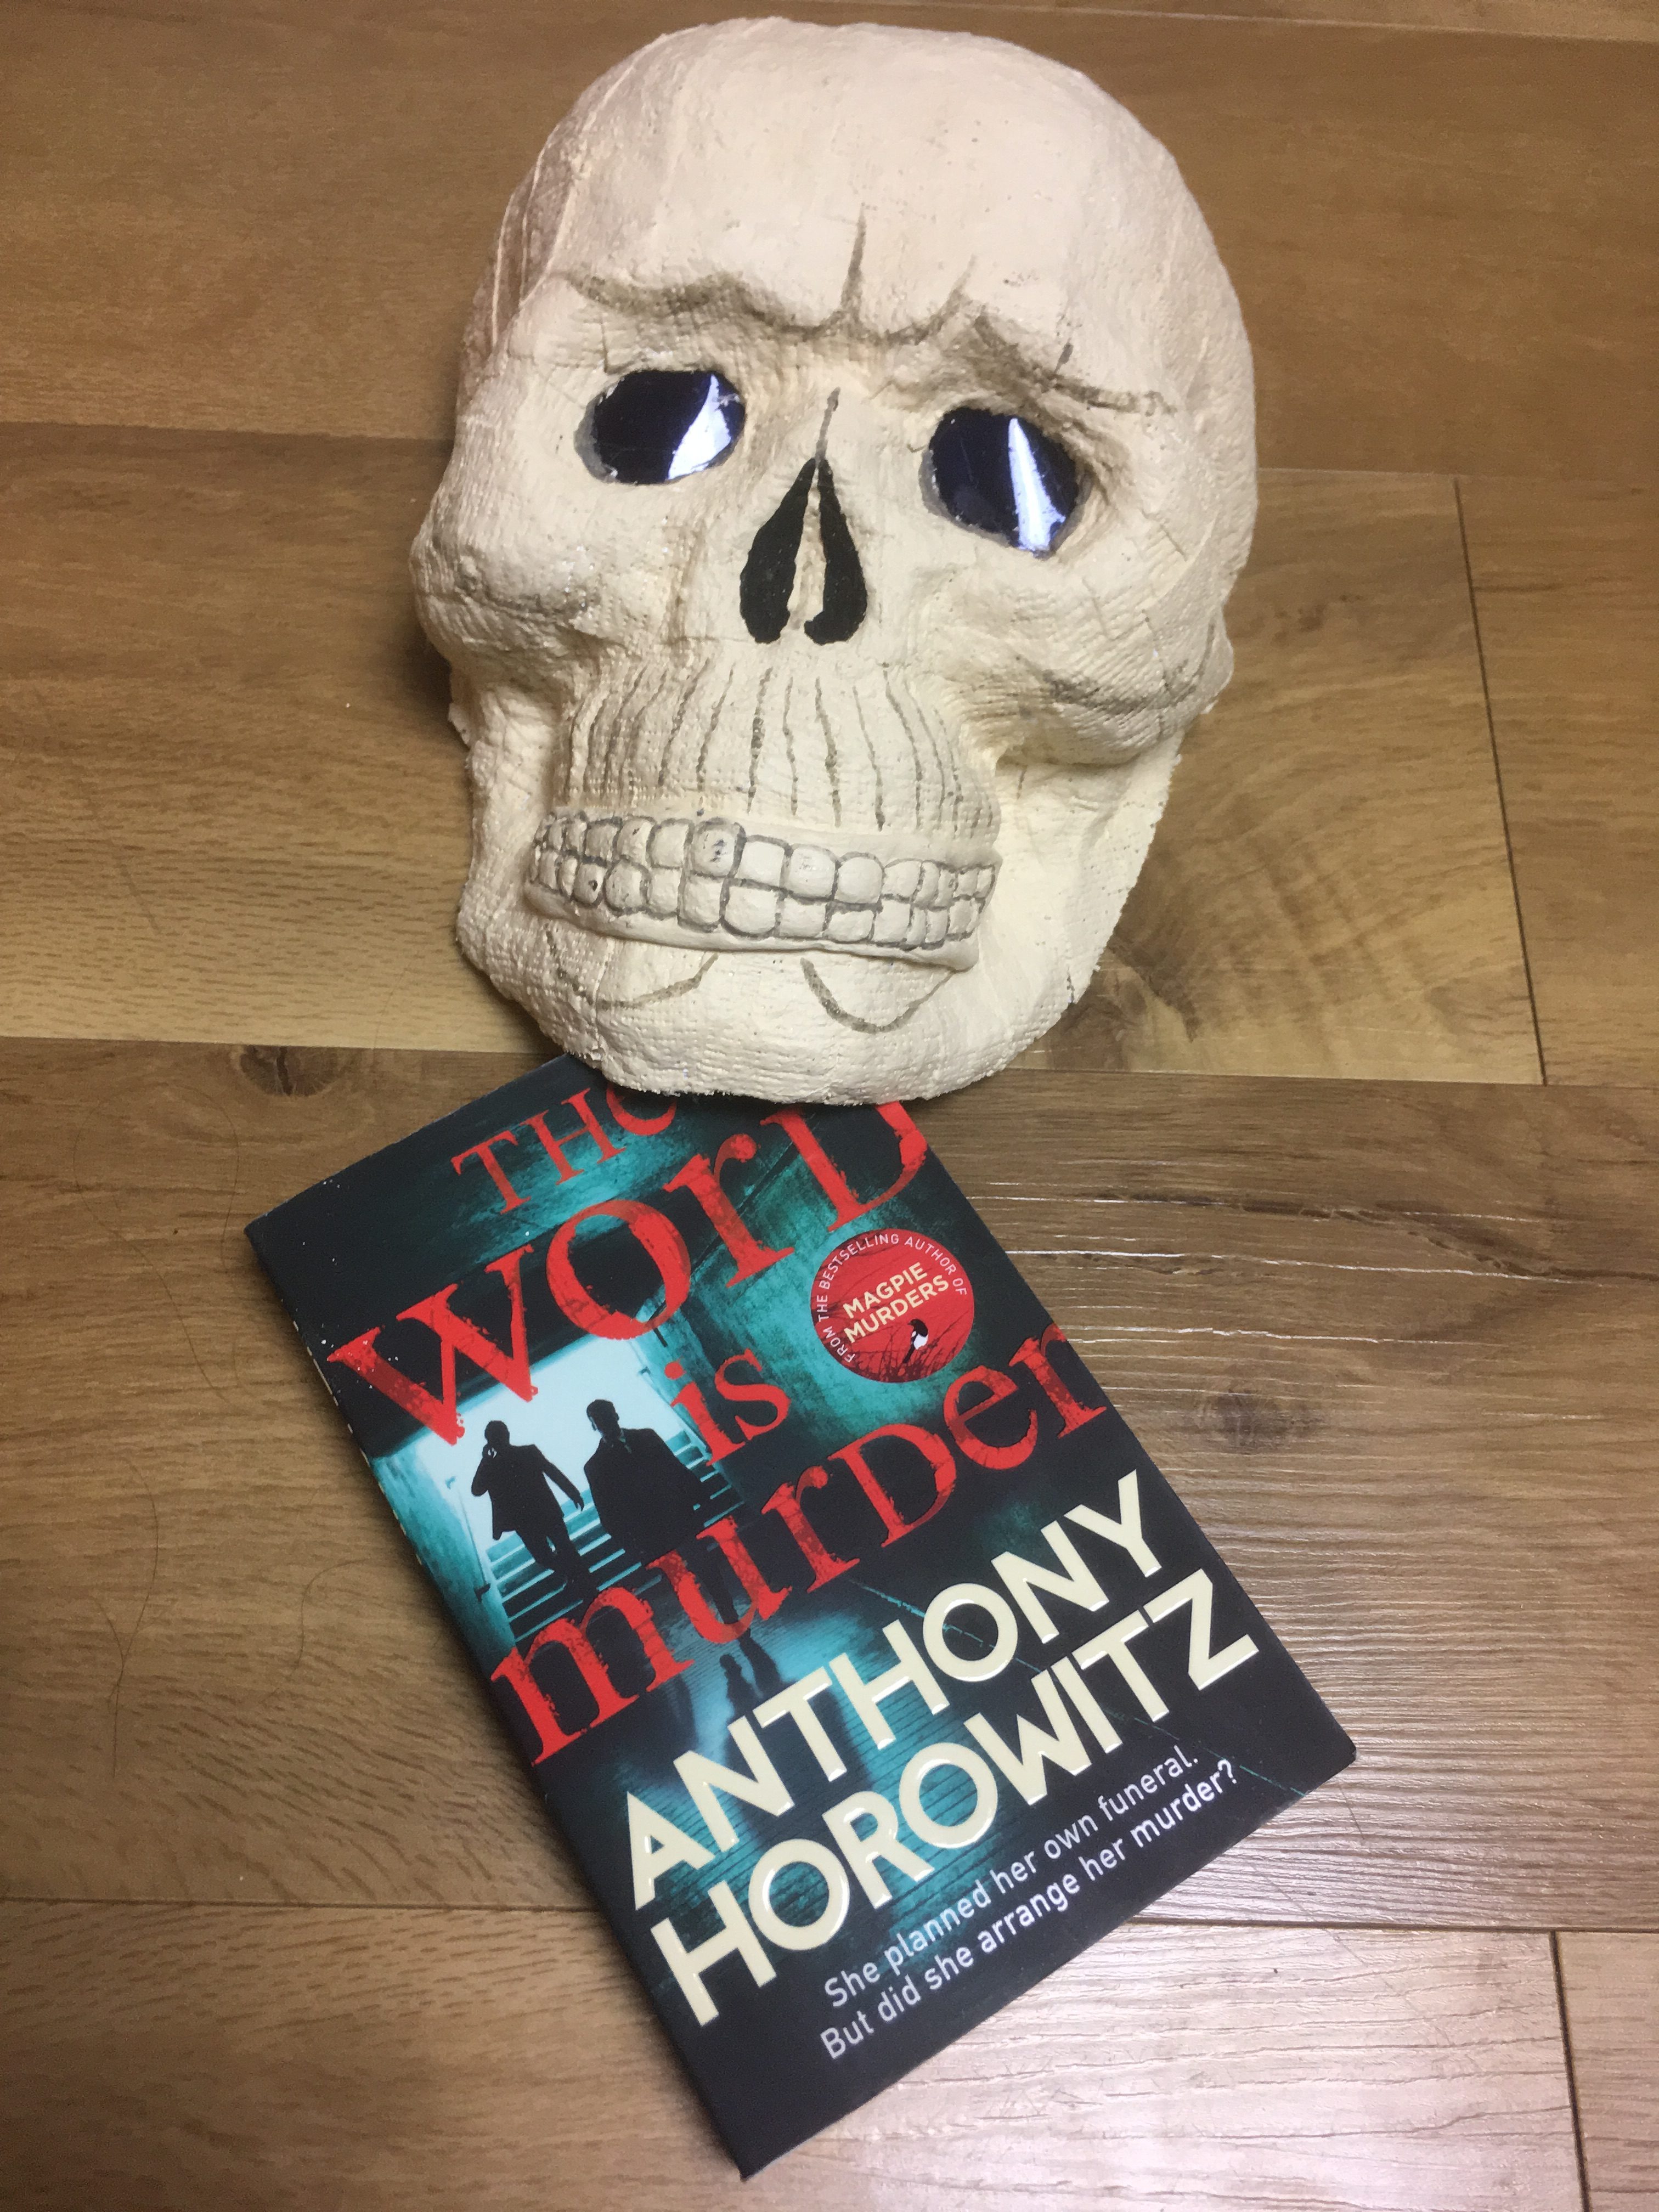 Book and Skull